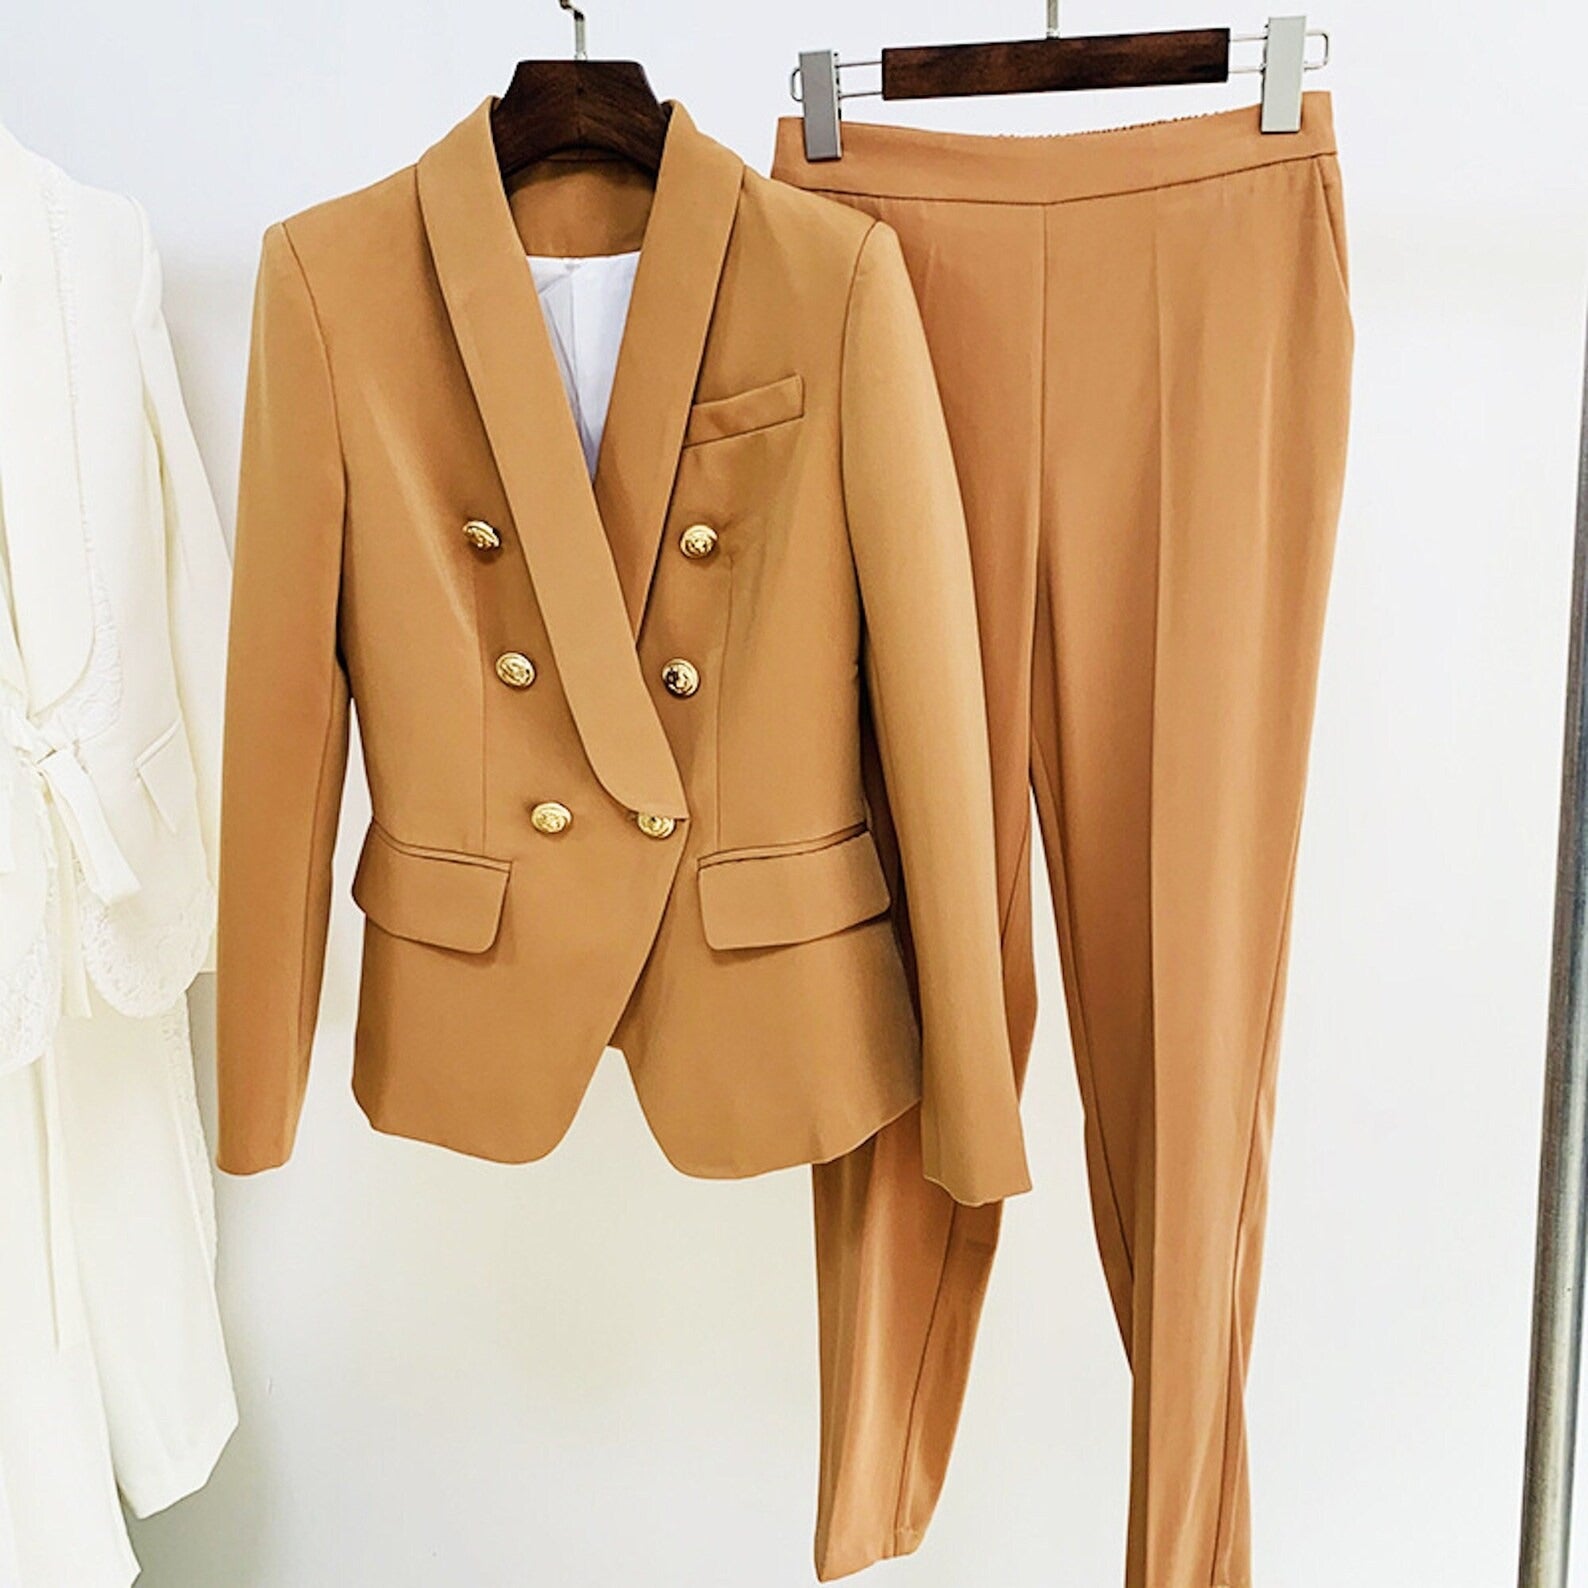 Tan Shawl Collar Golden Buttons Blazer + Crop Trousers Suit Quick International Service!  Tan Shawl Collar Golden Buttons Blazer + Crop Trousers Suit , can wear it for College Inaugurations, Ceremony , Business use, Onsite and Official use. The comfort of our ladies tailored suits are unsurpassed, as is the confidence it can provide its wearer in knowing that they are looking at their absolute best.